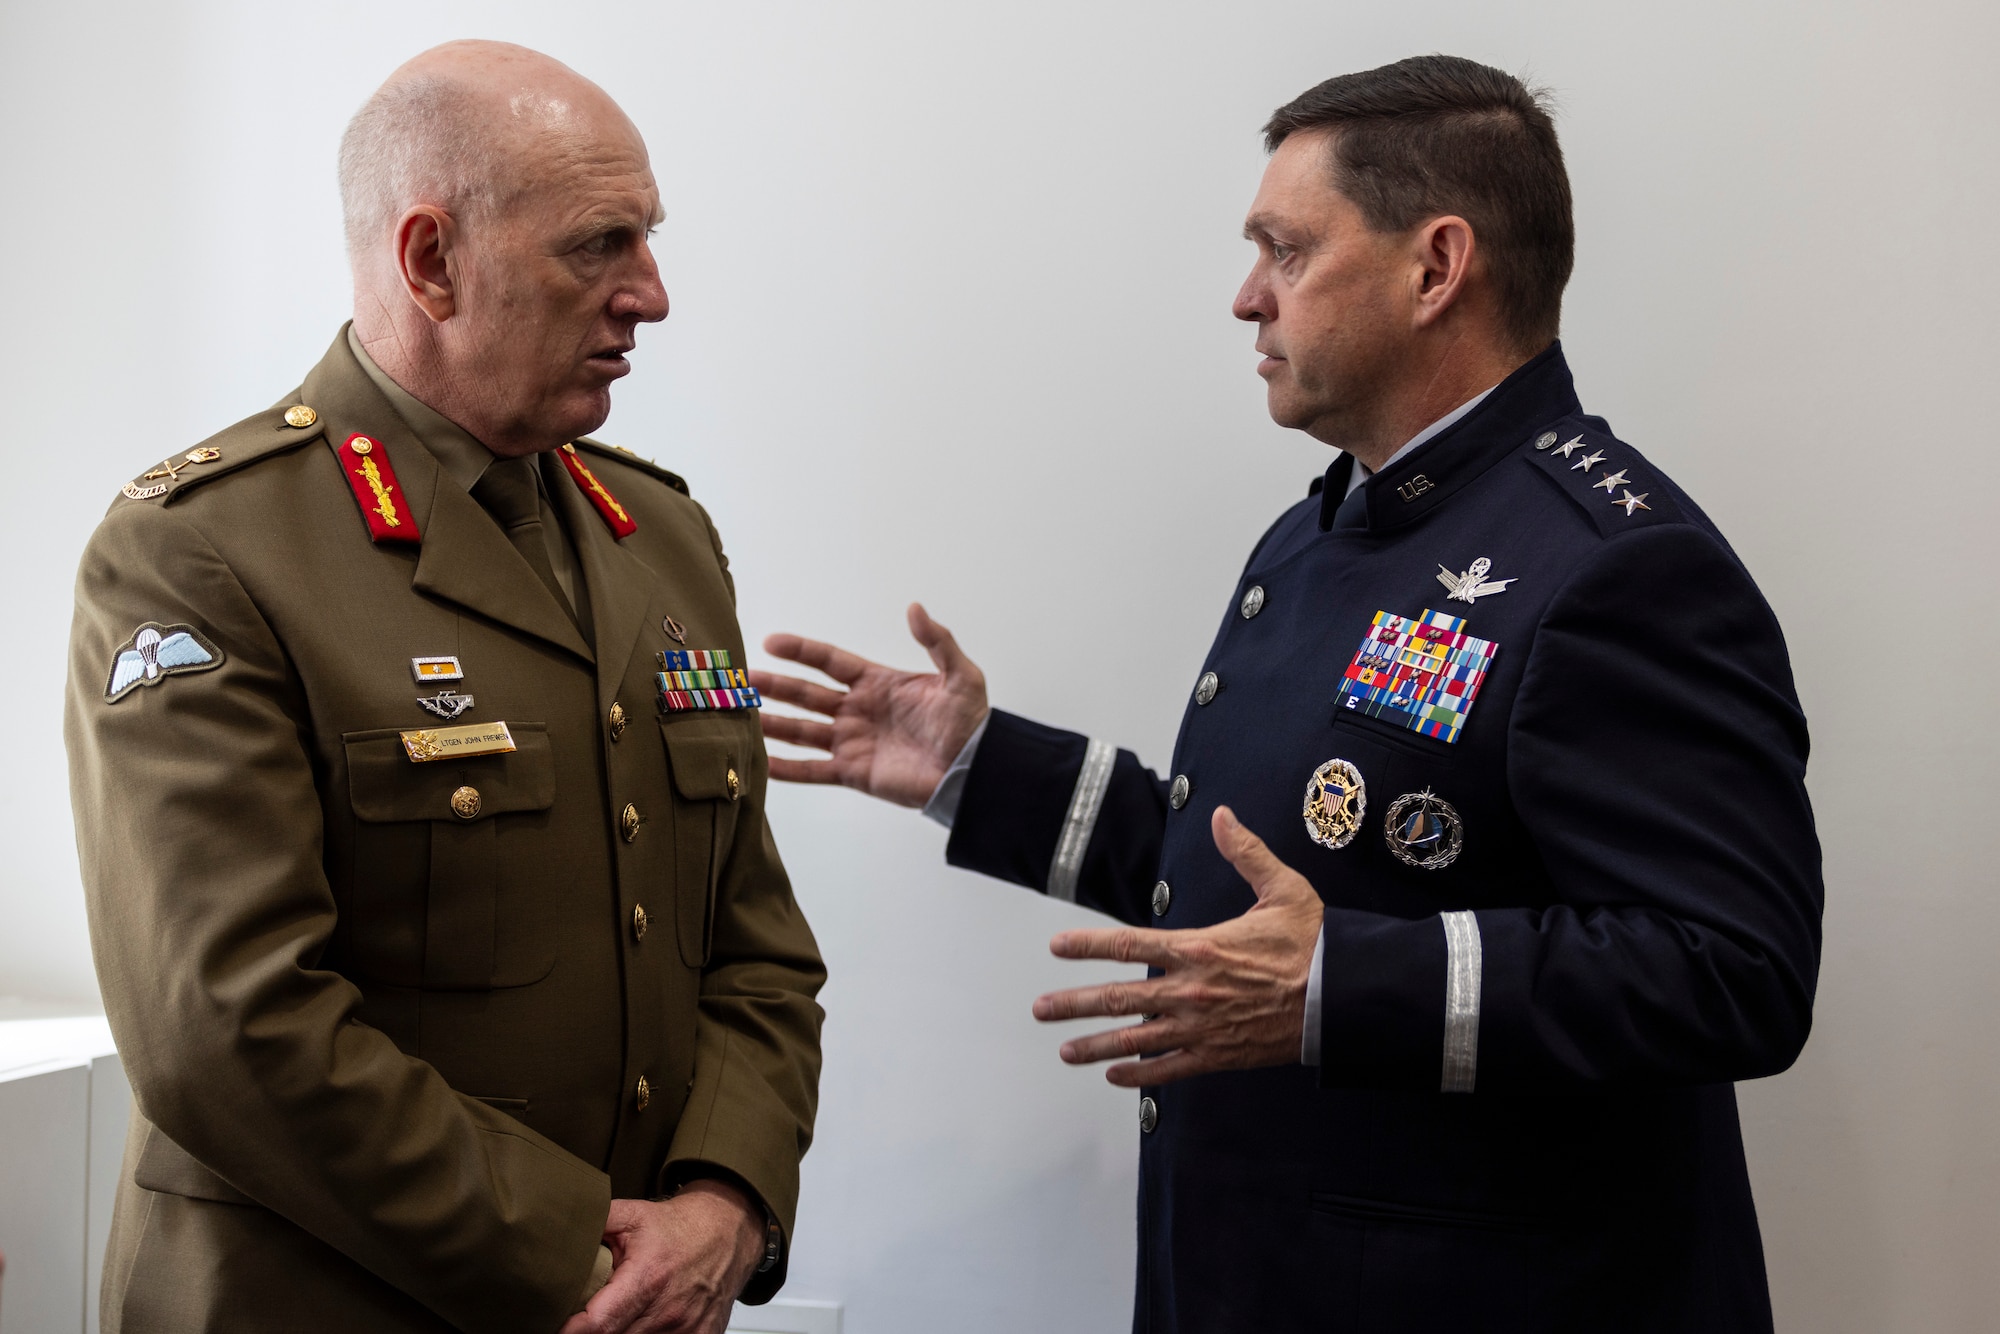 Chief of Space Operations Gen. Chance Saltzman meets with Australian Defence Force Chief of Joint Capabilities Lt. Gen. John Frewen during a trilateral engagement with senior military leaders from the UK and Australia in London, July 12, 2023. Saltzman and Frewen were joined by Royal Air Force Air & Space Commander Air Marshal Harv Smyth, UK Space Command Commander Air Vice Marshal Paul Godfrey, and Australian Defence Space Command Commander Air Vice Marshal Cath Roberts. The representatives of the three allied nations discussed ongoing cooperative efforts between the U.S. Space Force, RAF and Defence Space Command, as well as opportunities to expand collaboration. (Royal Air Force courtesy photo)